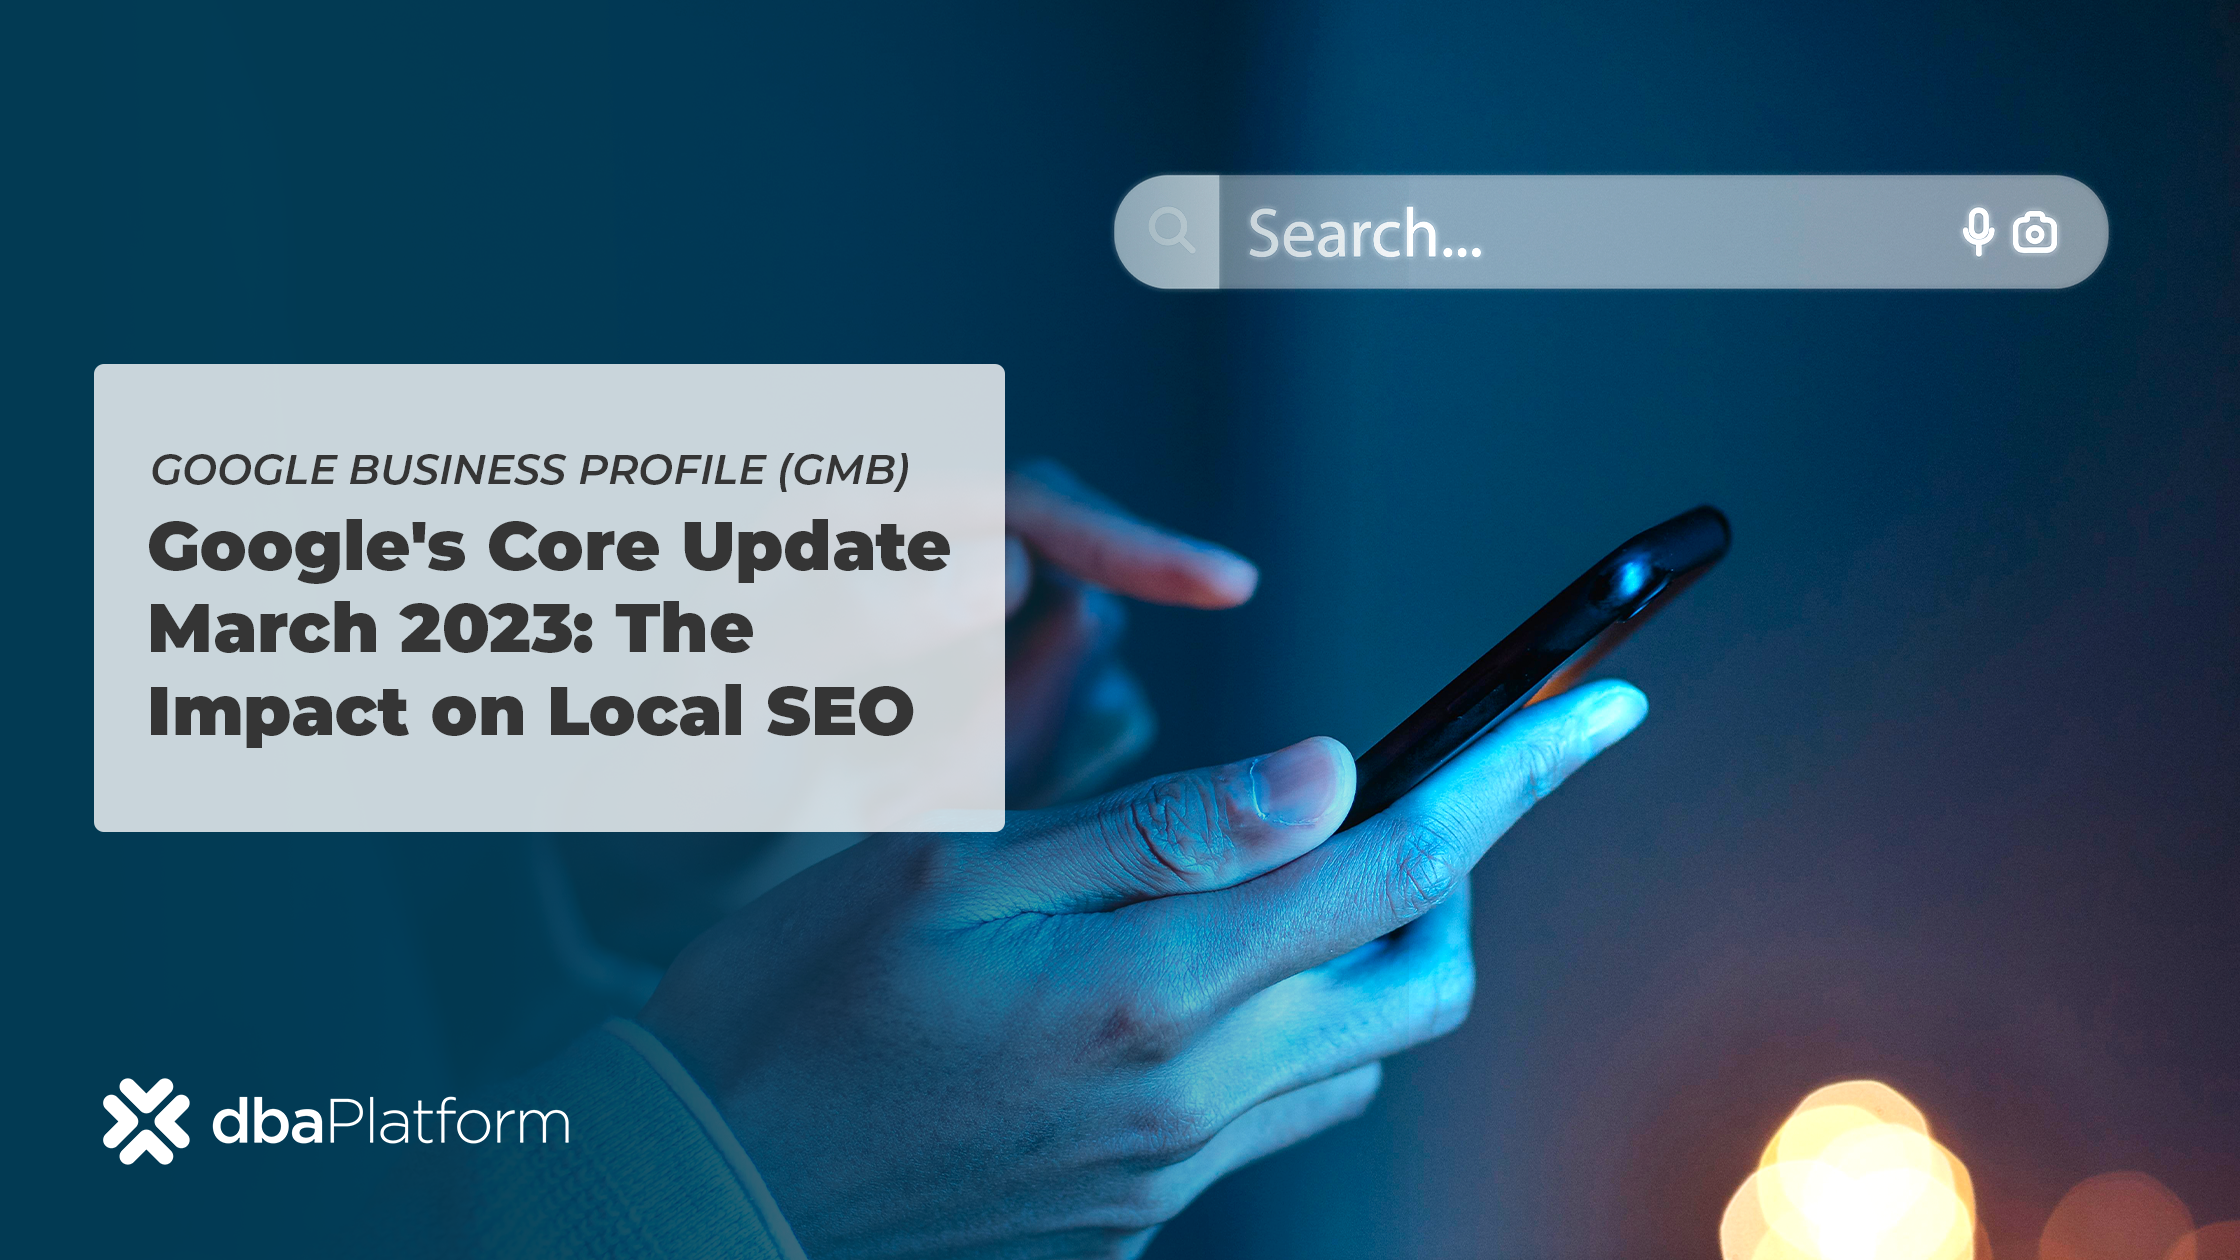 Google's core update in March 2023 impacted local SEO ranking factors